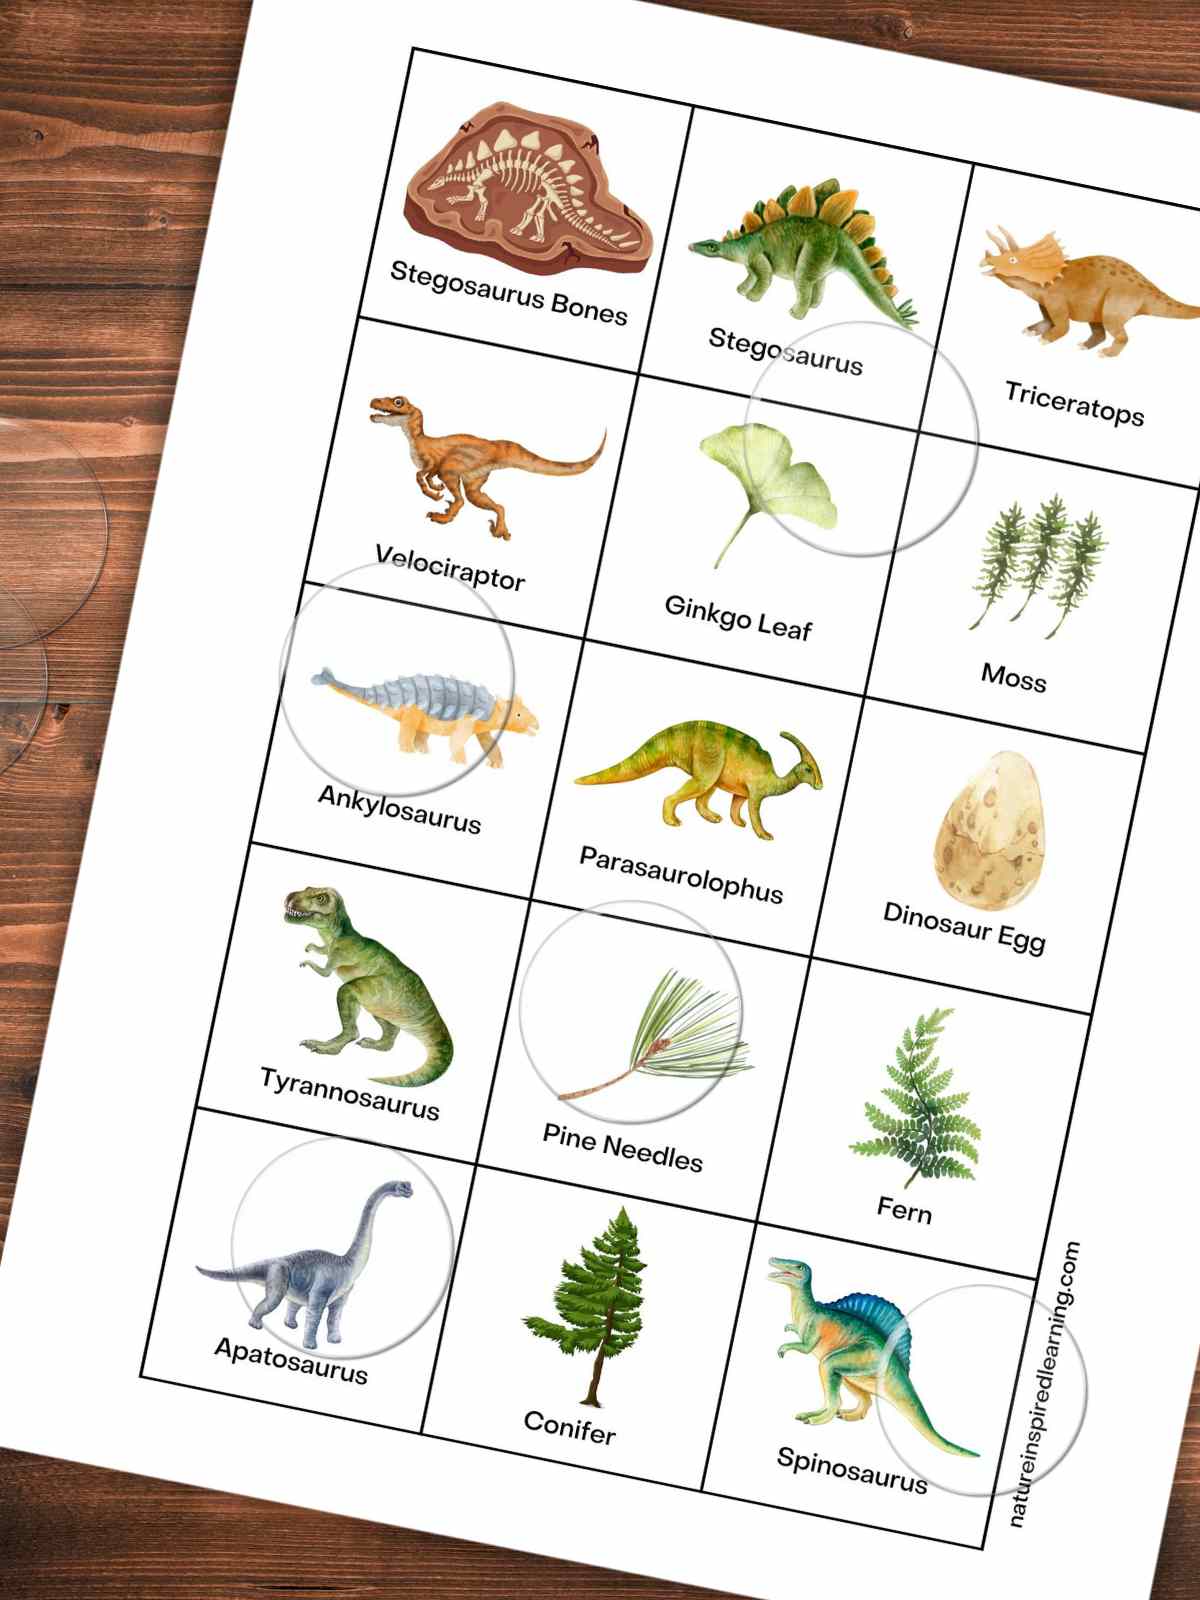 Dinosaur calling cards with names of each dinosaur and plant slanted on a wooden background with clear bingo chips on top.